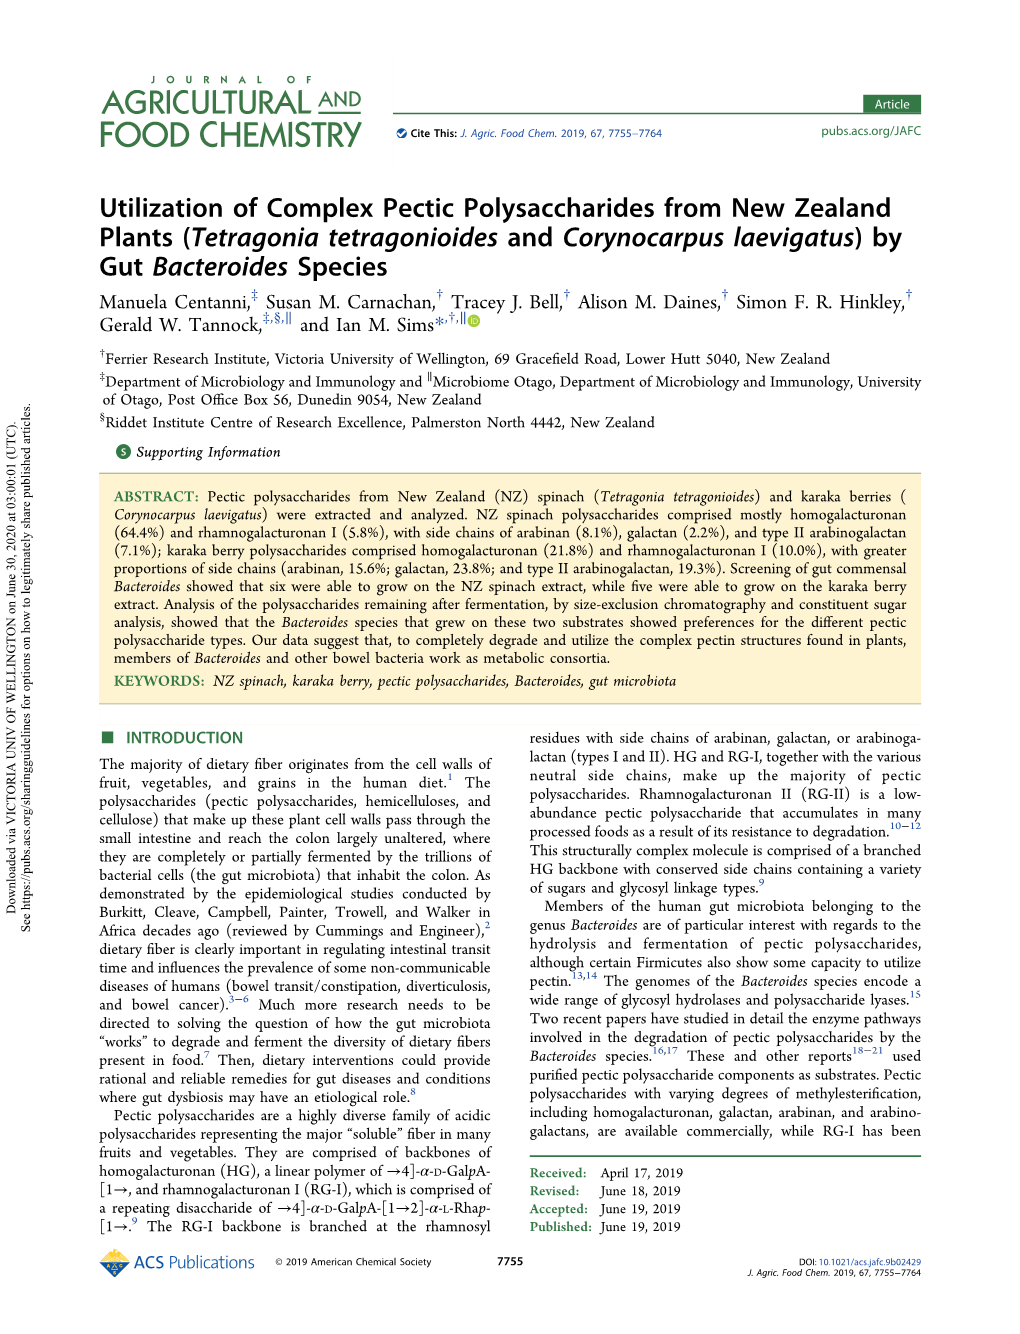 Utilization of Complex Pectic Polysaccharides from New Zealand